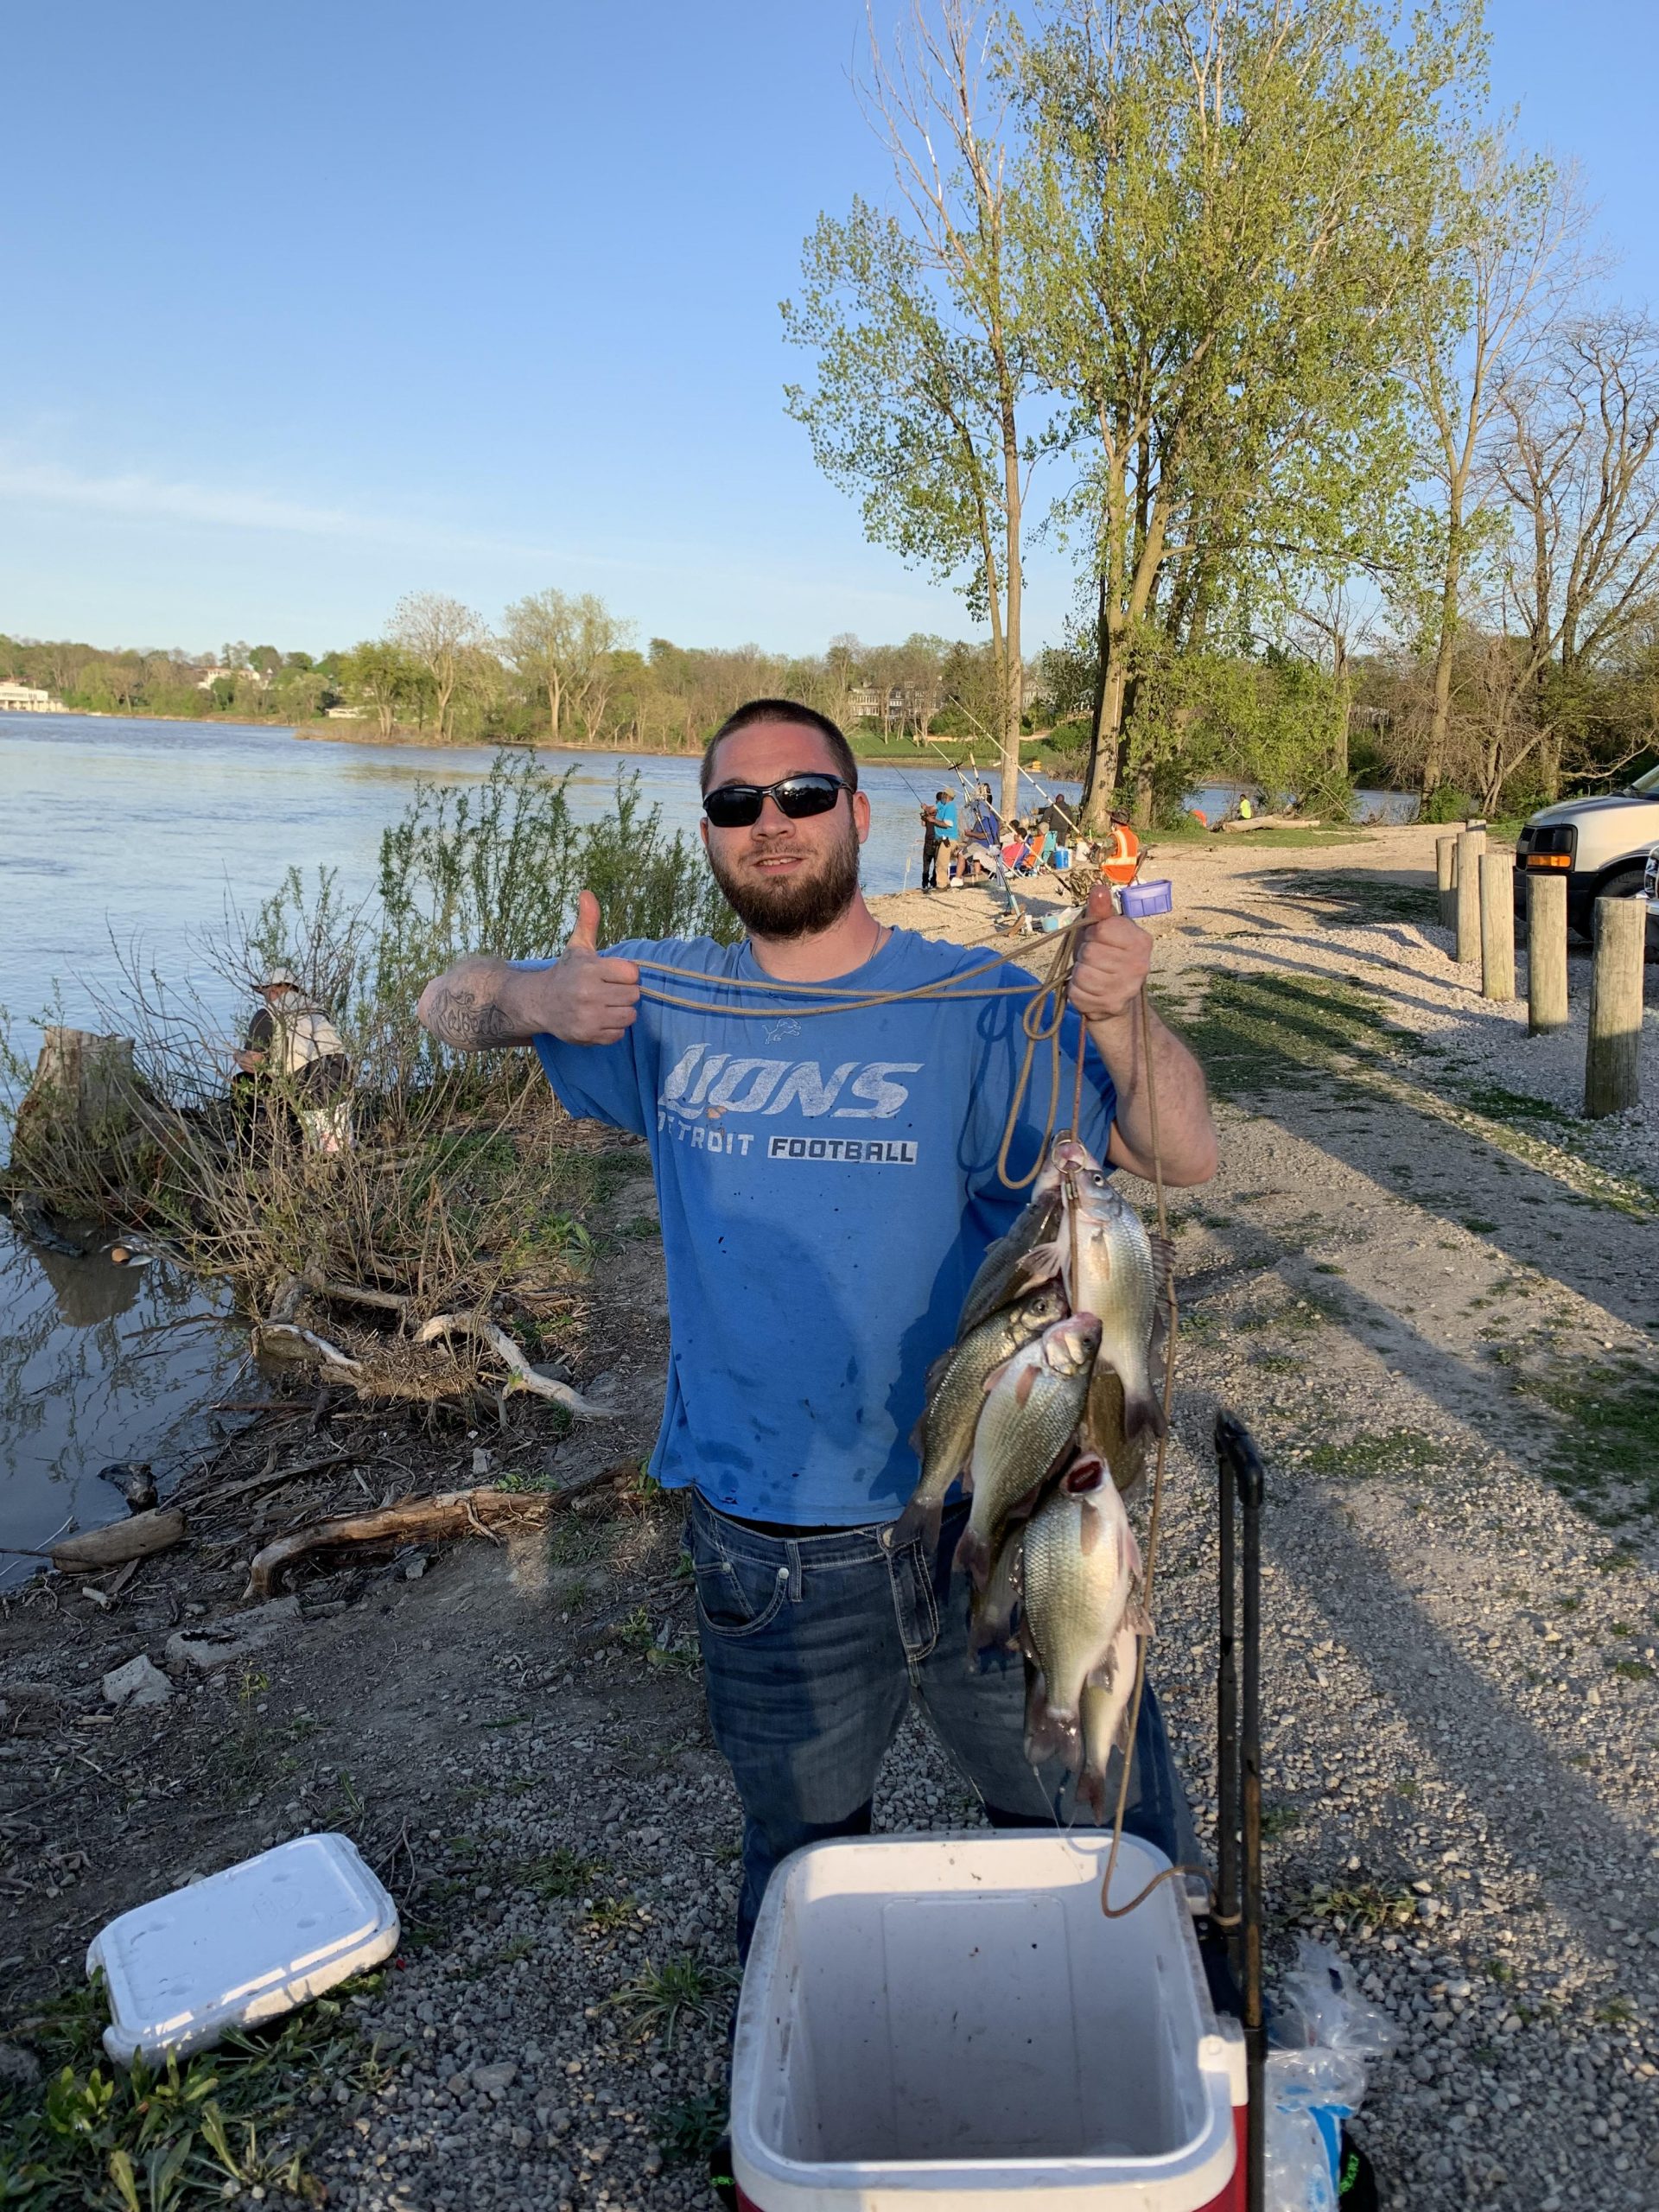 Maumee river report- may 10th 2022